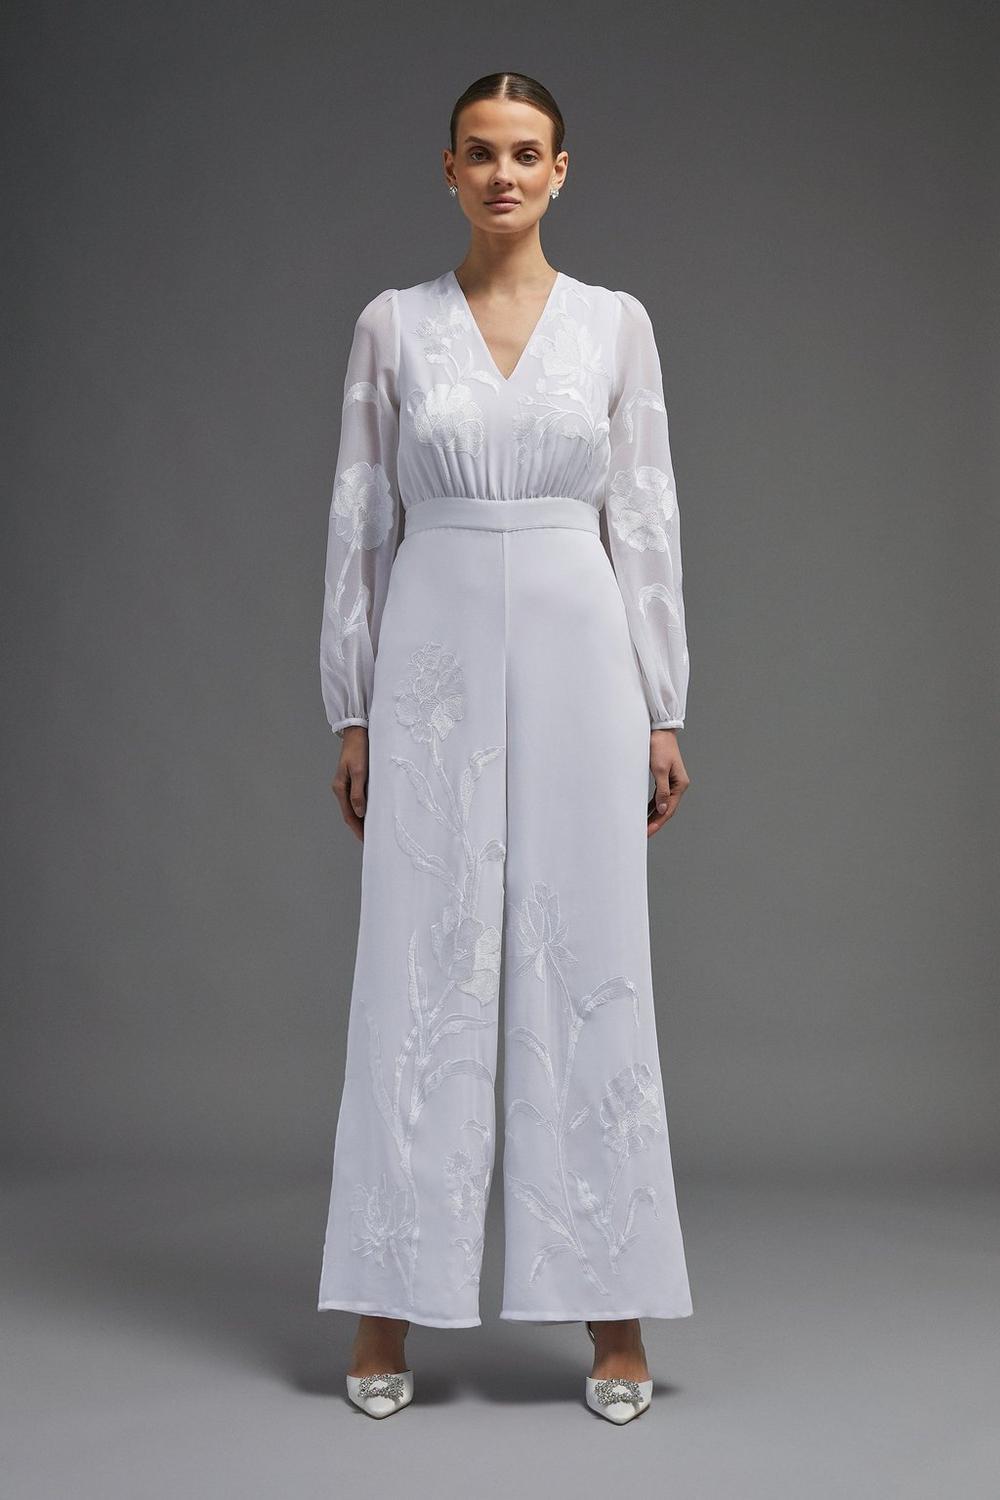 Model wearing an embroidered satin wedding jumpsuit